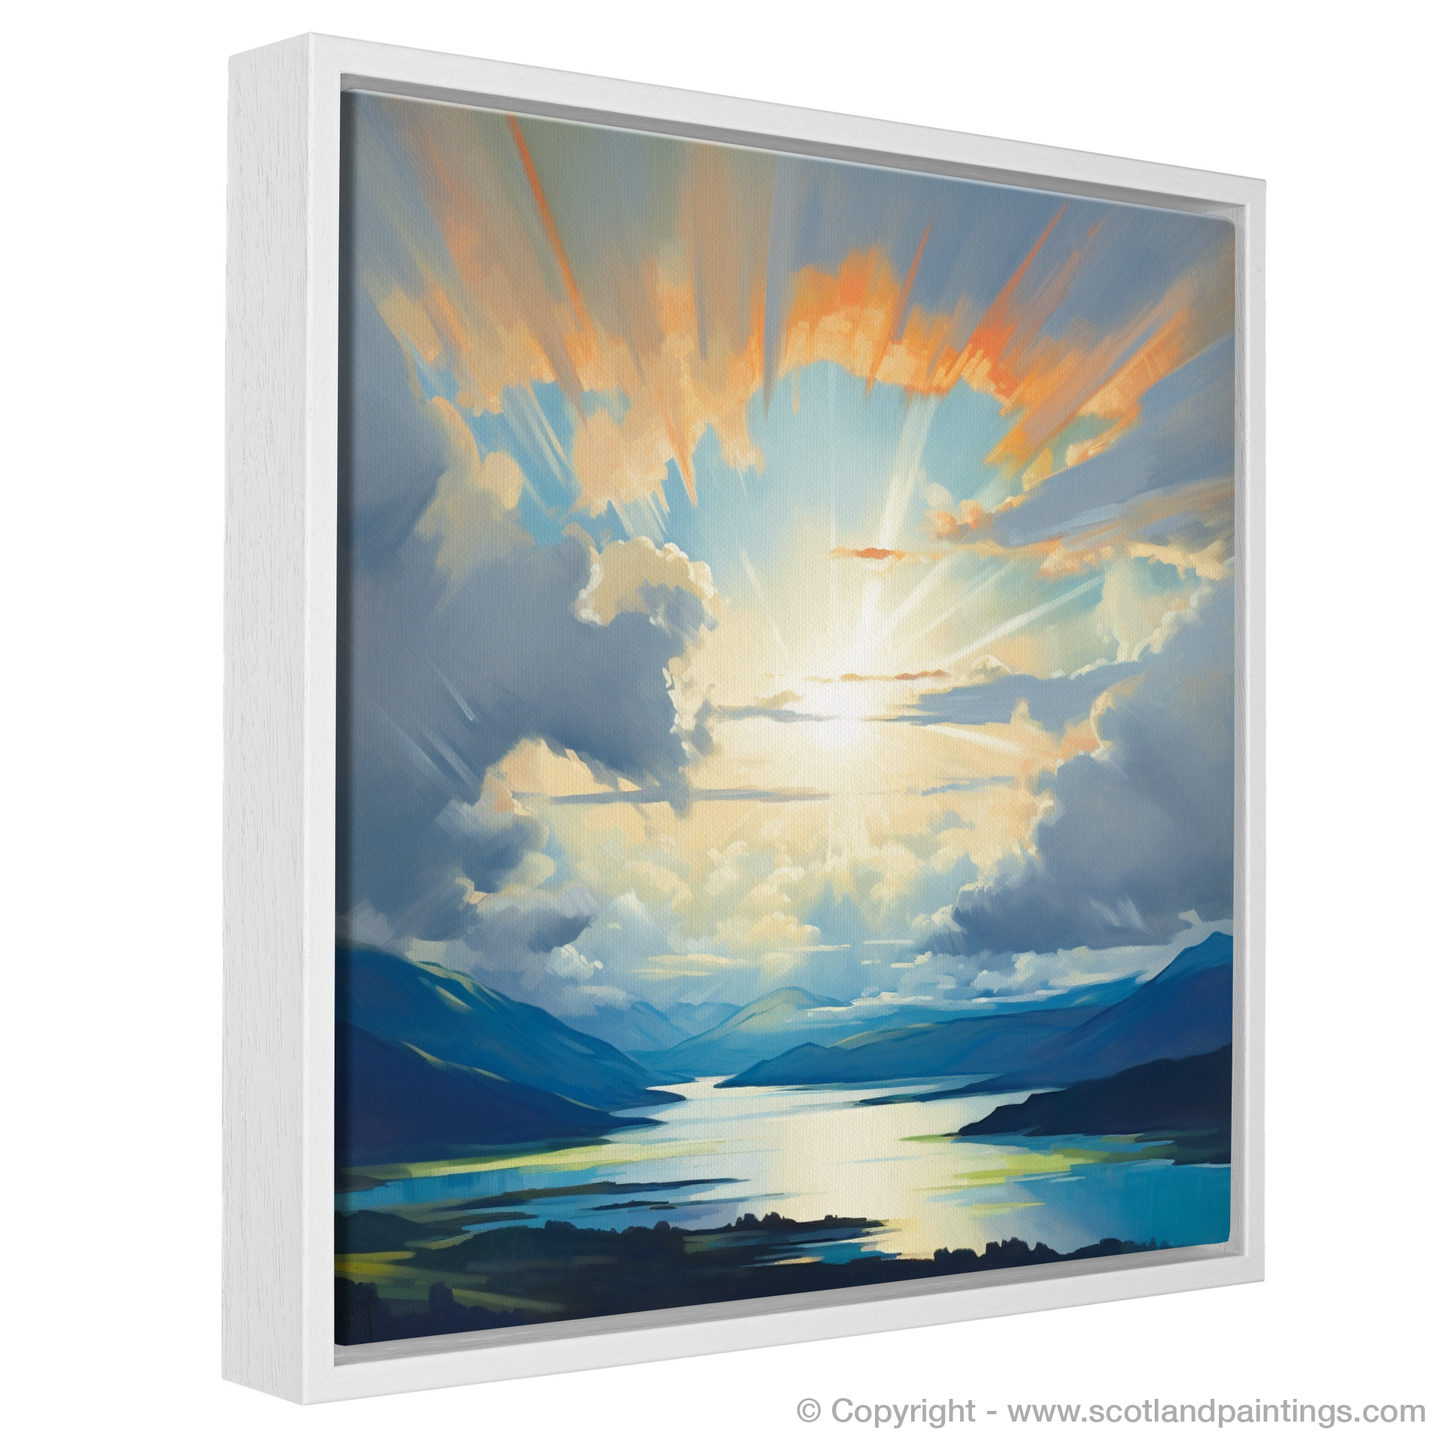 Painting and Art Print of Sun rays through clouds above Loch Lomond entitled "Sunlit Serenity over Loch Lomond".